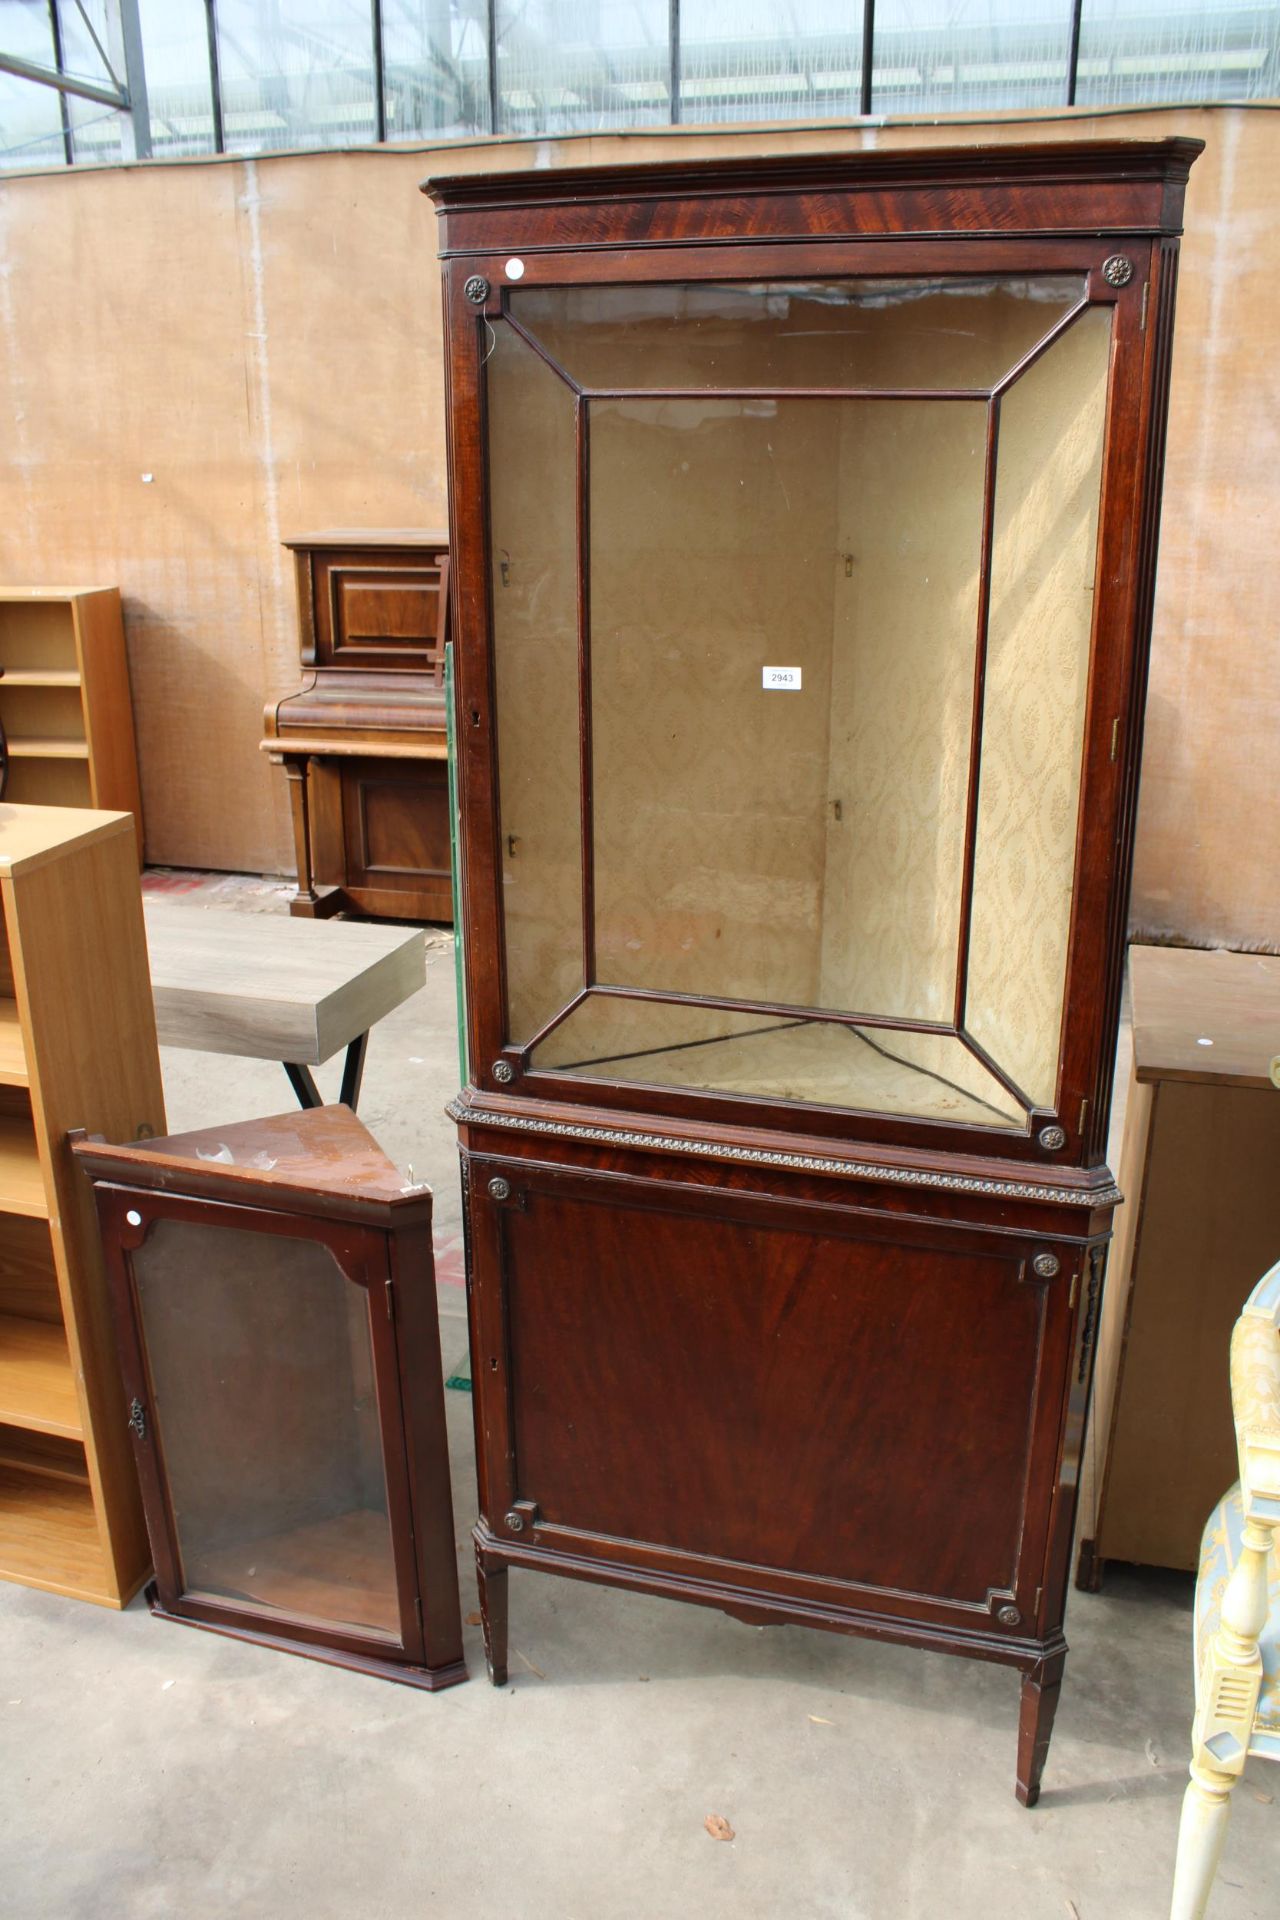 A 19TH CENTURY STYLE MAHOGANY CORNER CUPBOARD WITH GLAZED UPPER PORTION AND A SMALL CORNER CUPBOARD